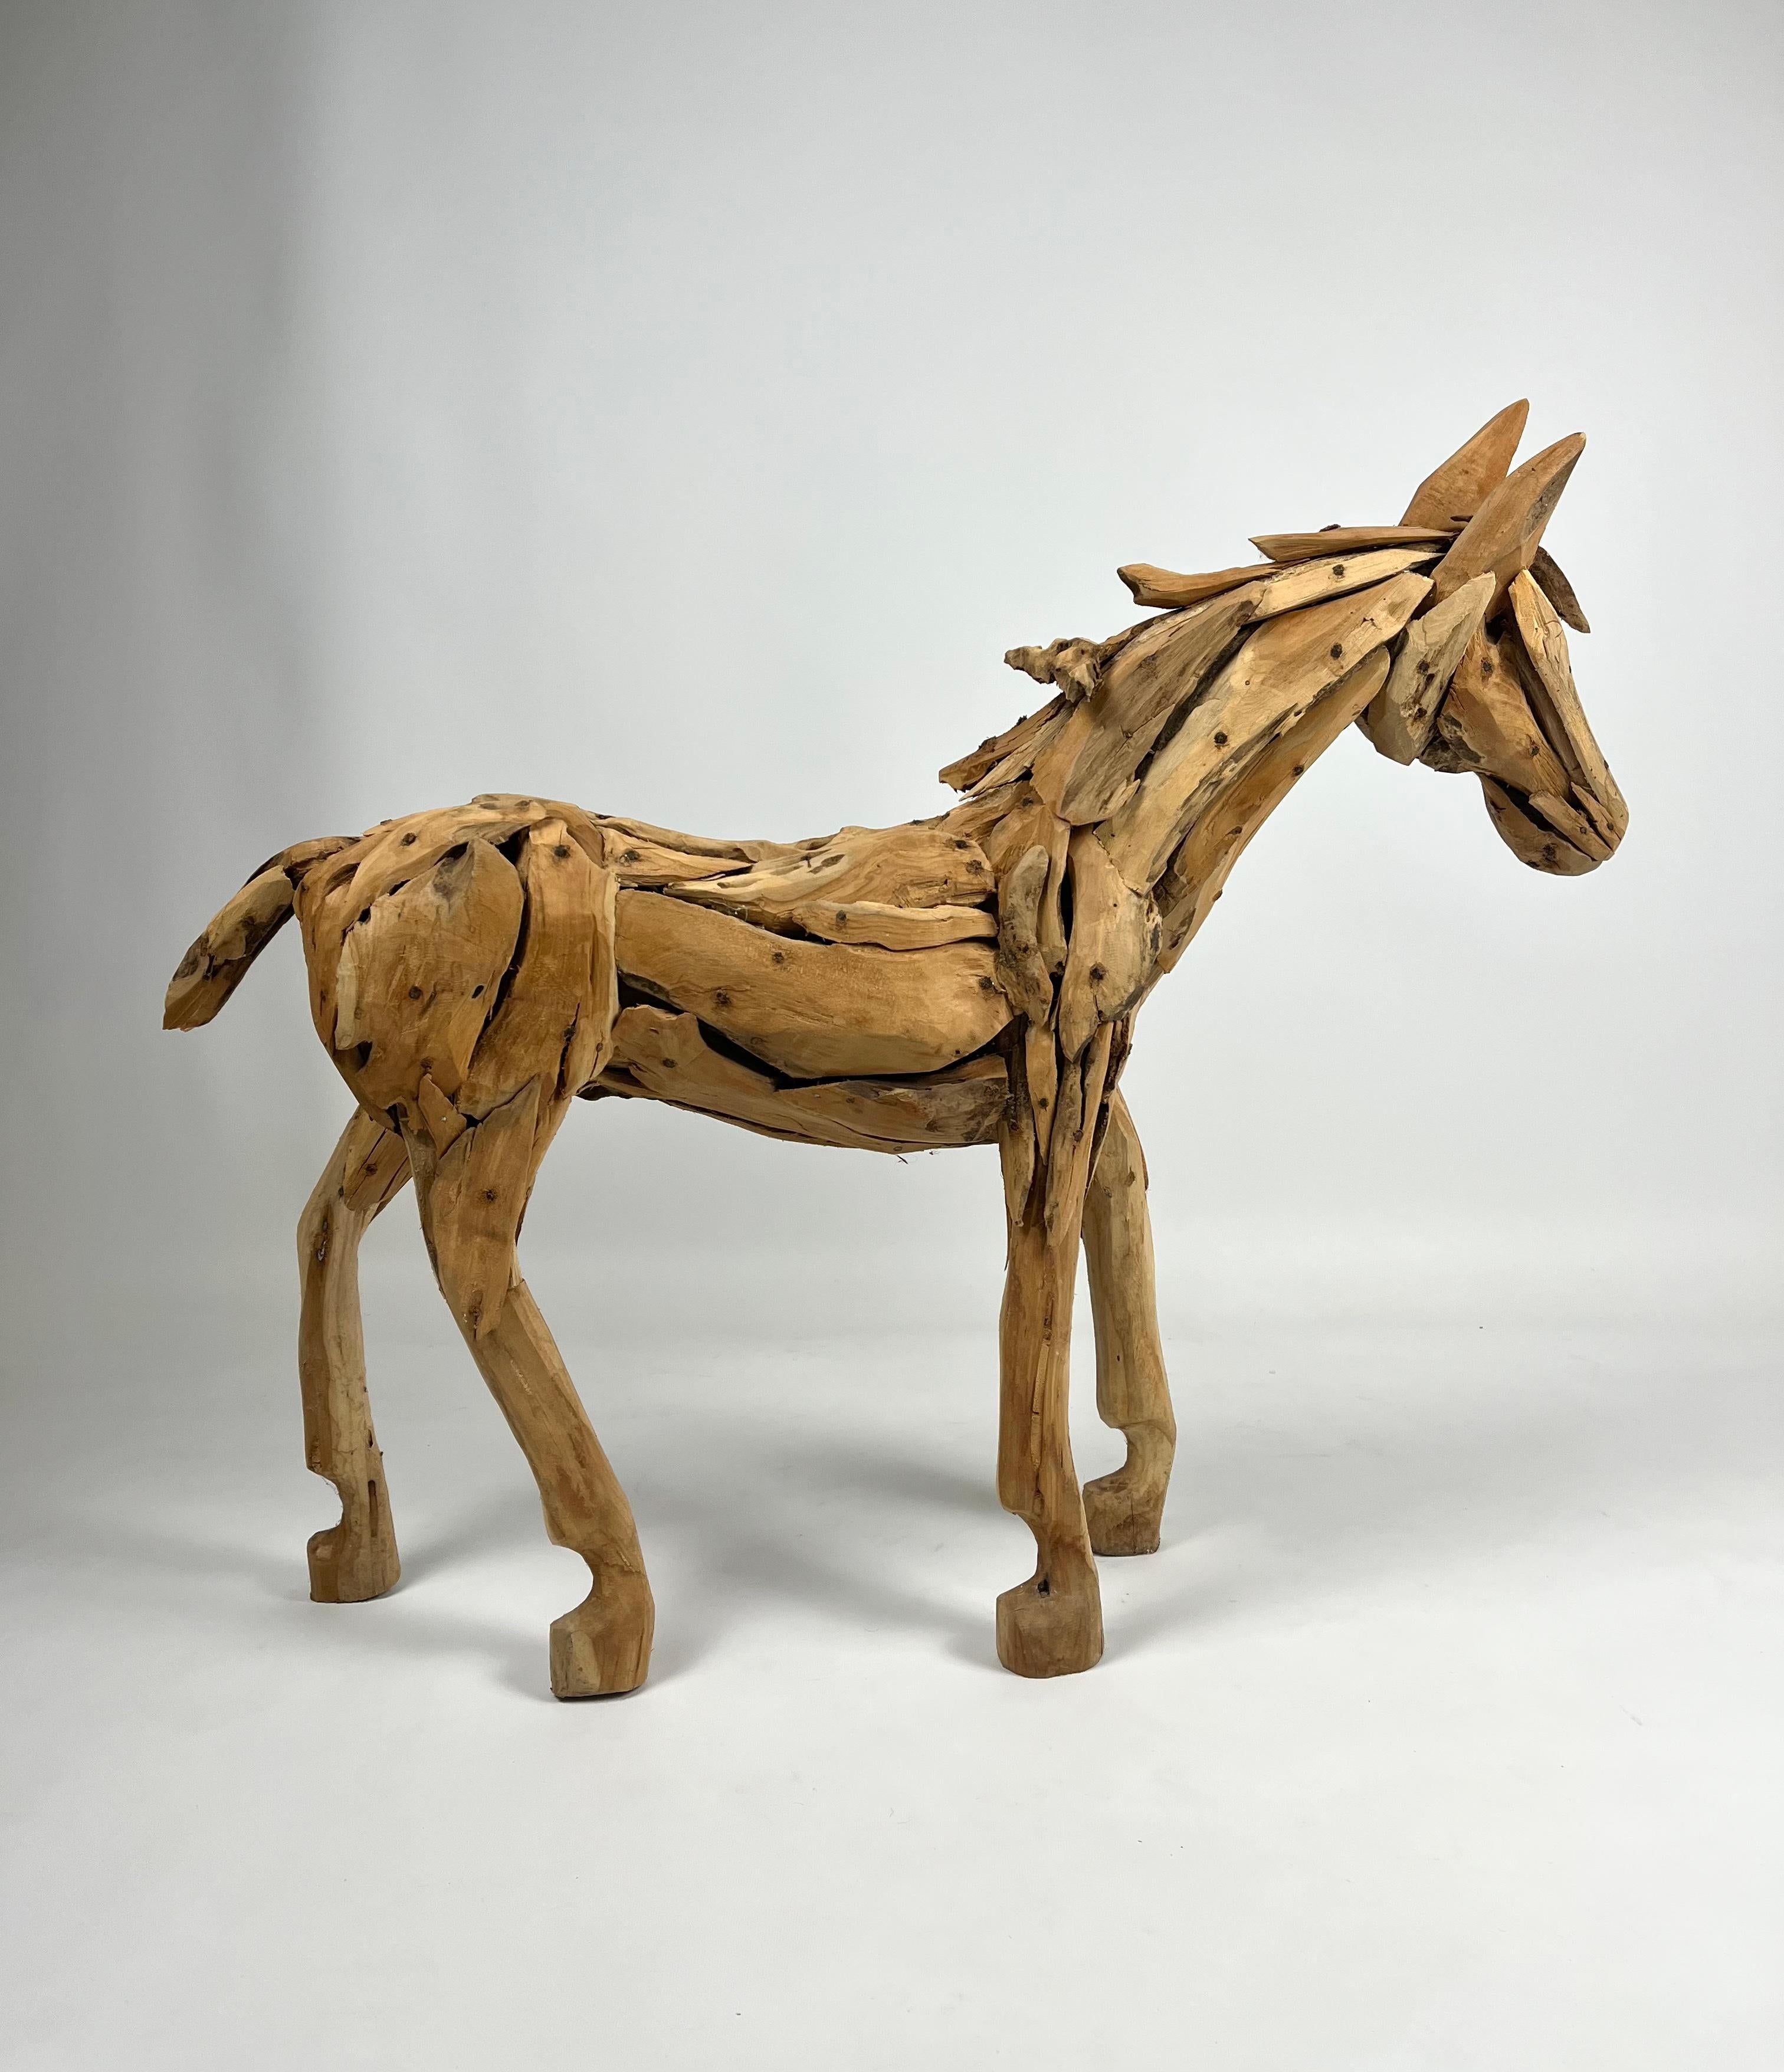 Sculpture of a foal made from pieces of teak
very decorative, it will find its place in a living room, a child's bedroom, a terrace etc...